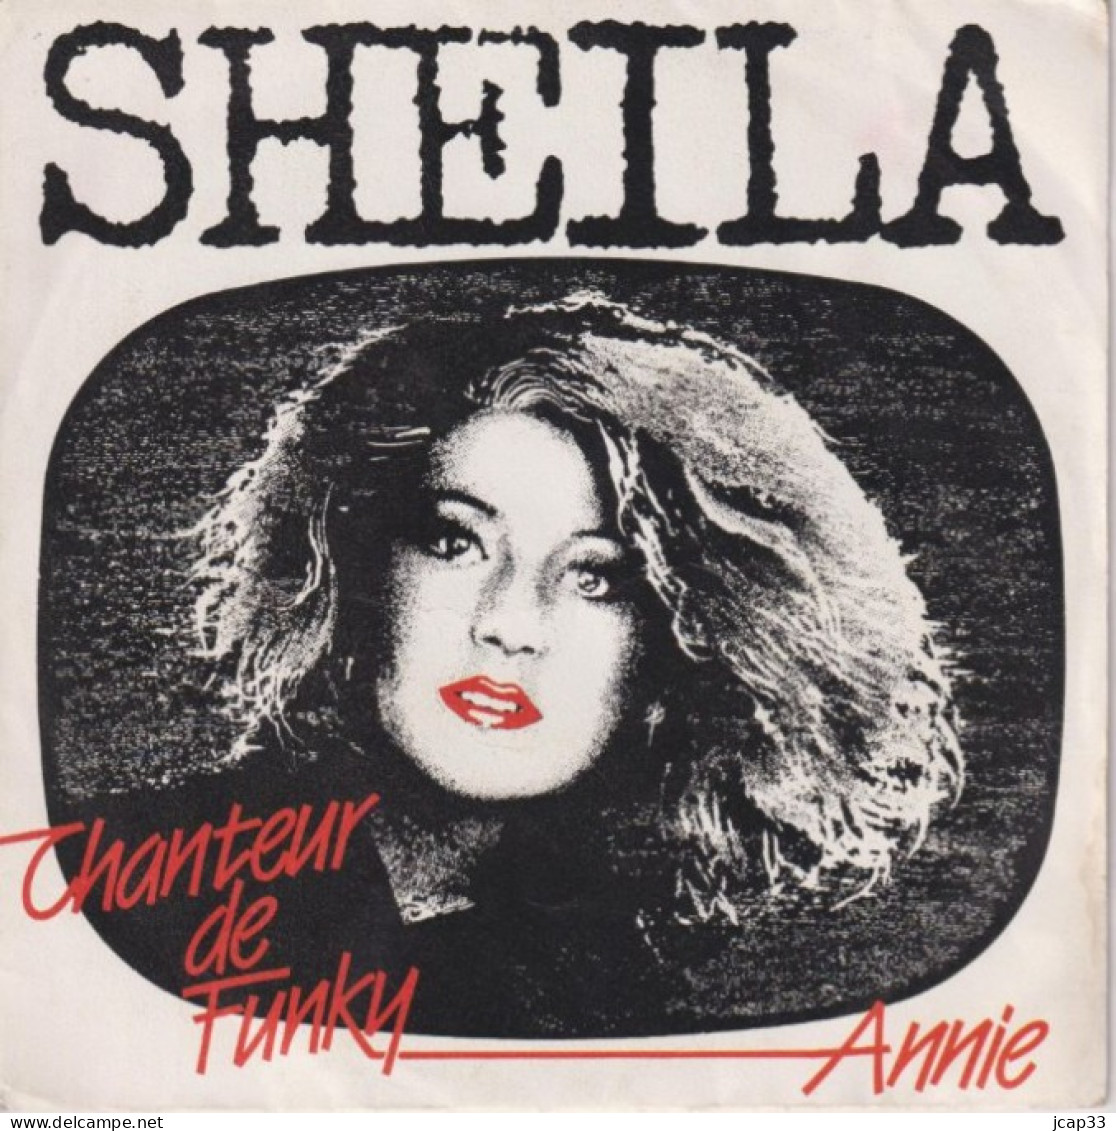 SHEILA  -  CHANTEUR DE FUNKY  -  ANNIE  -  1985  - - Other - French Music